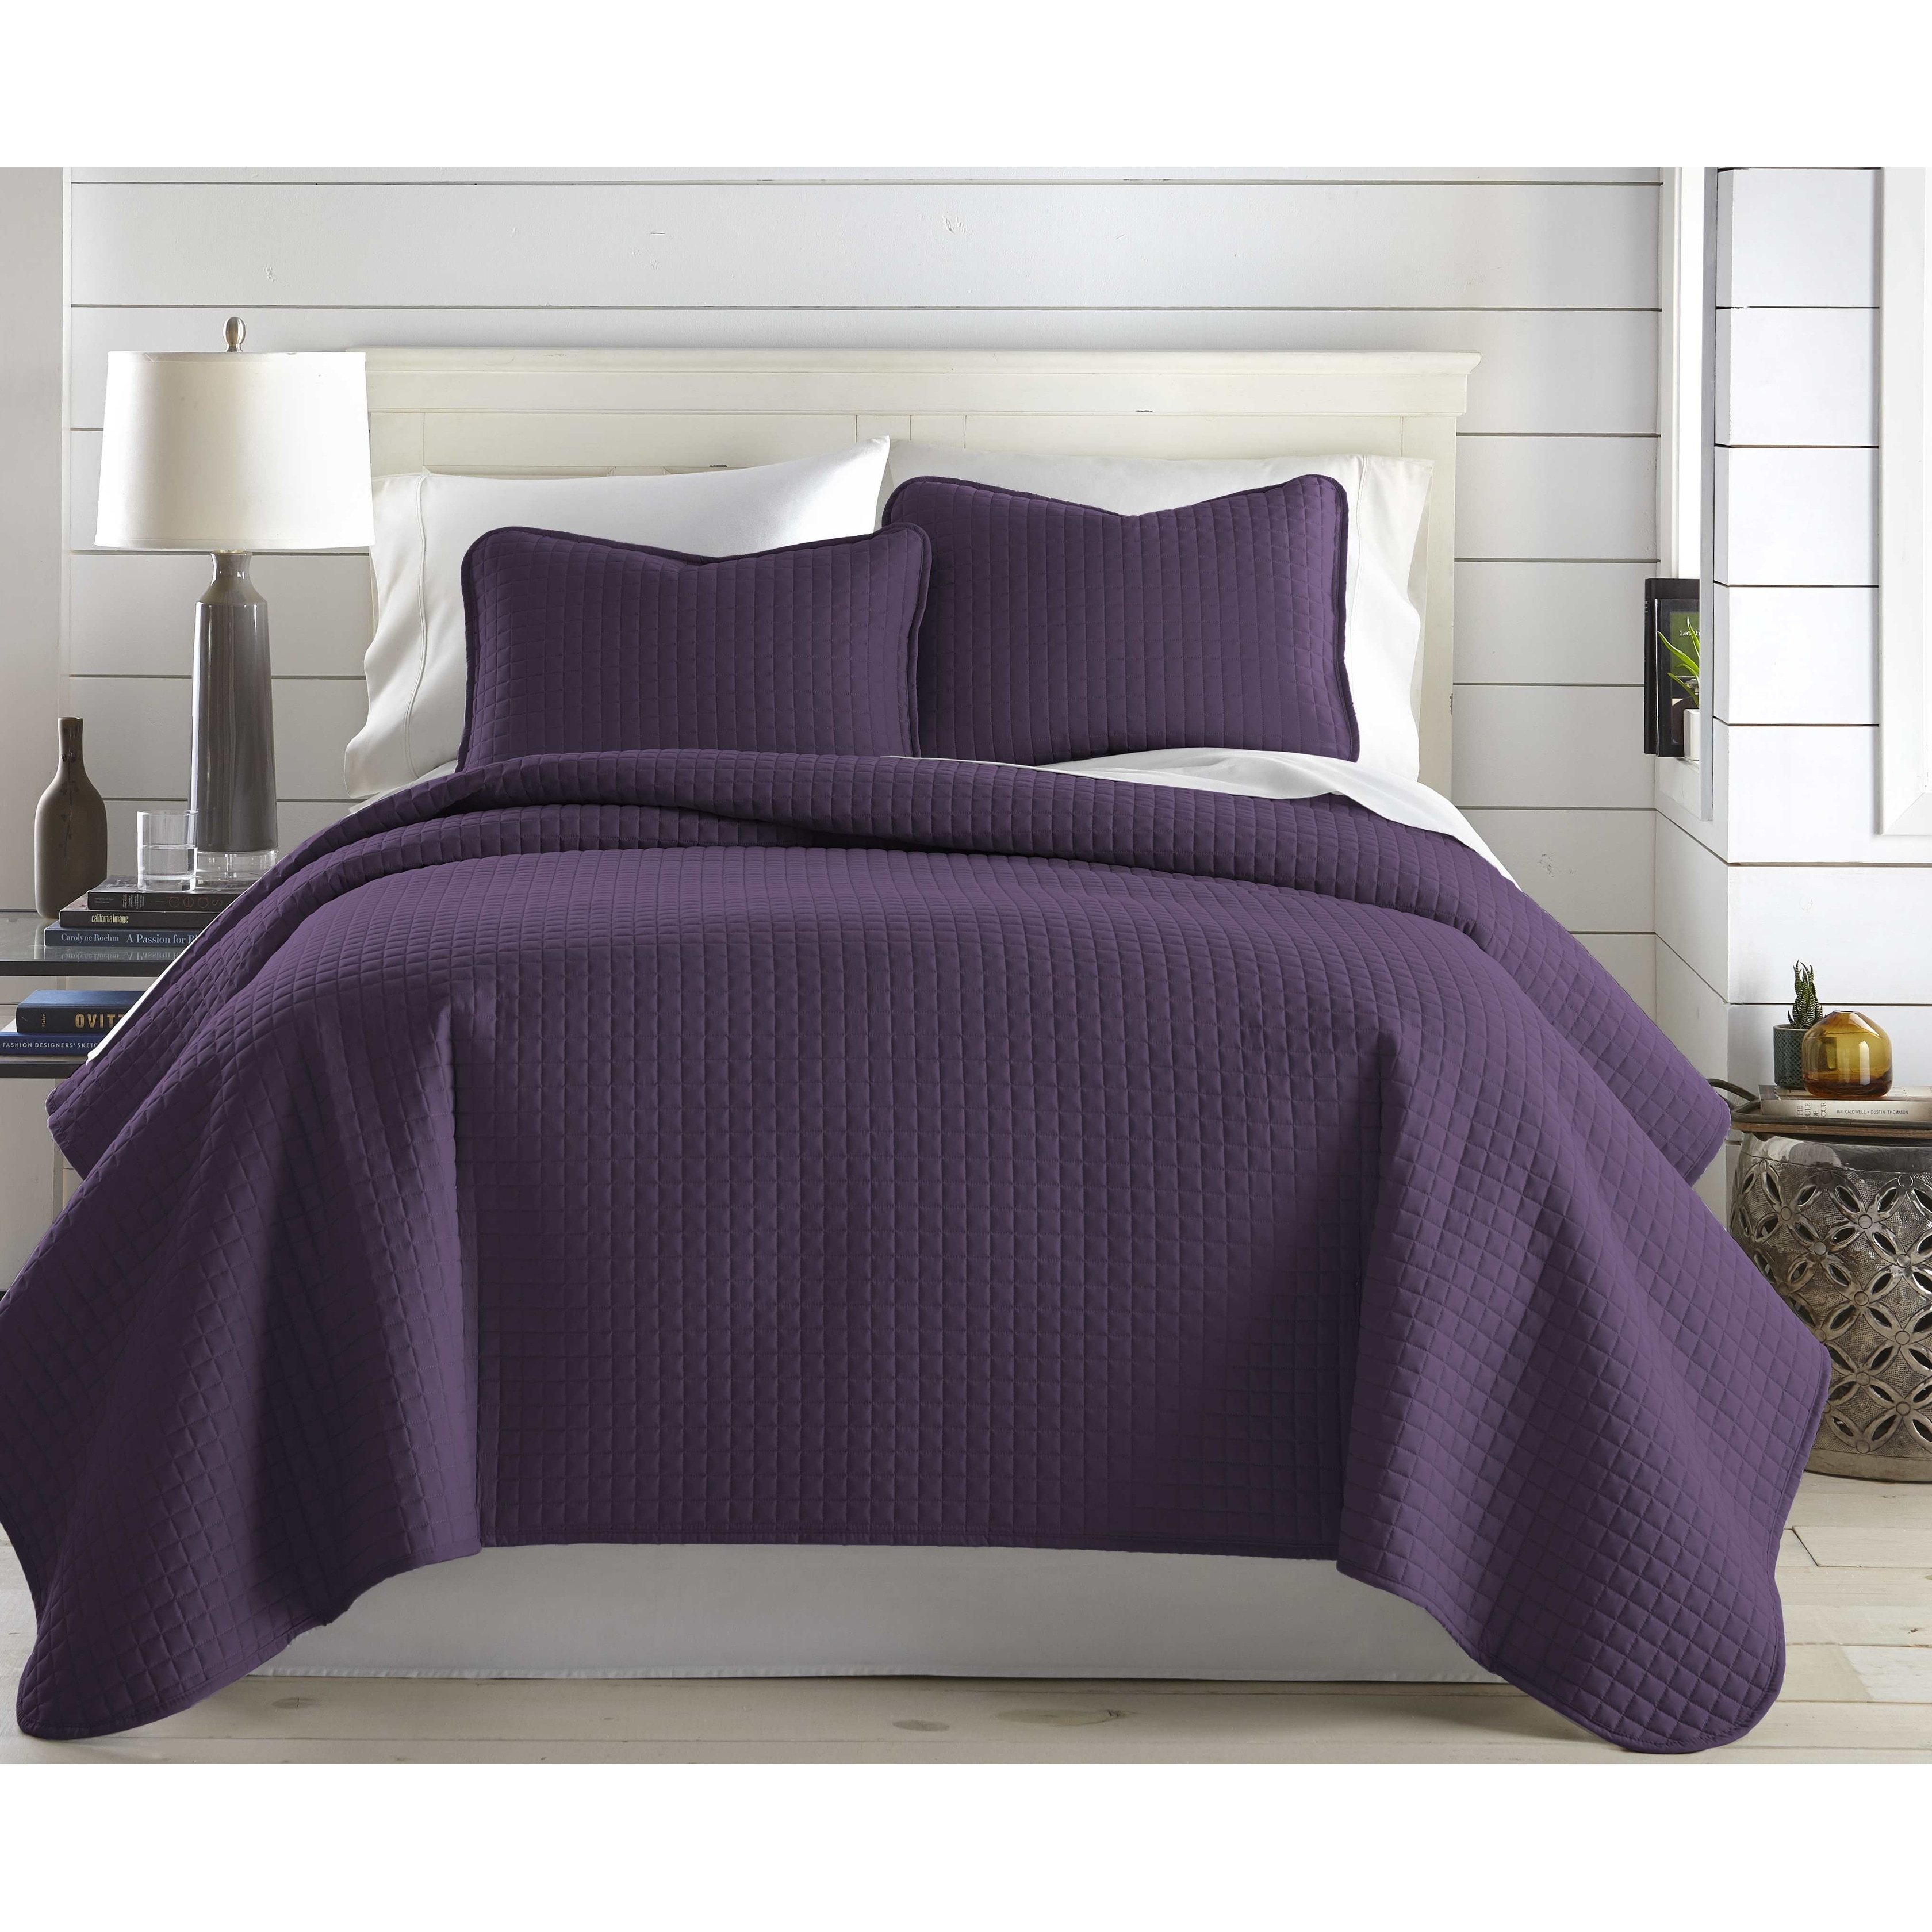 https://ak1.ostkcdn.com/images/products/is/images/direct/01bfe77223b9fc381bc1233fed89ad0bc9f493ab/Oversized-Solid-3-piece-Quilt-Set-by-Southshore-Fine-Linens.jpg